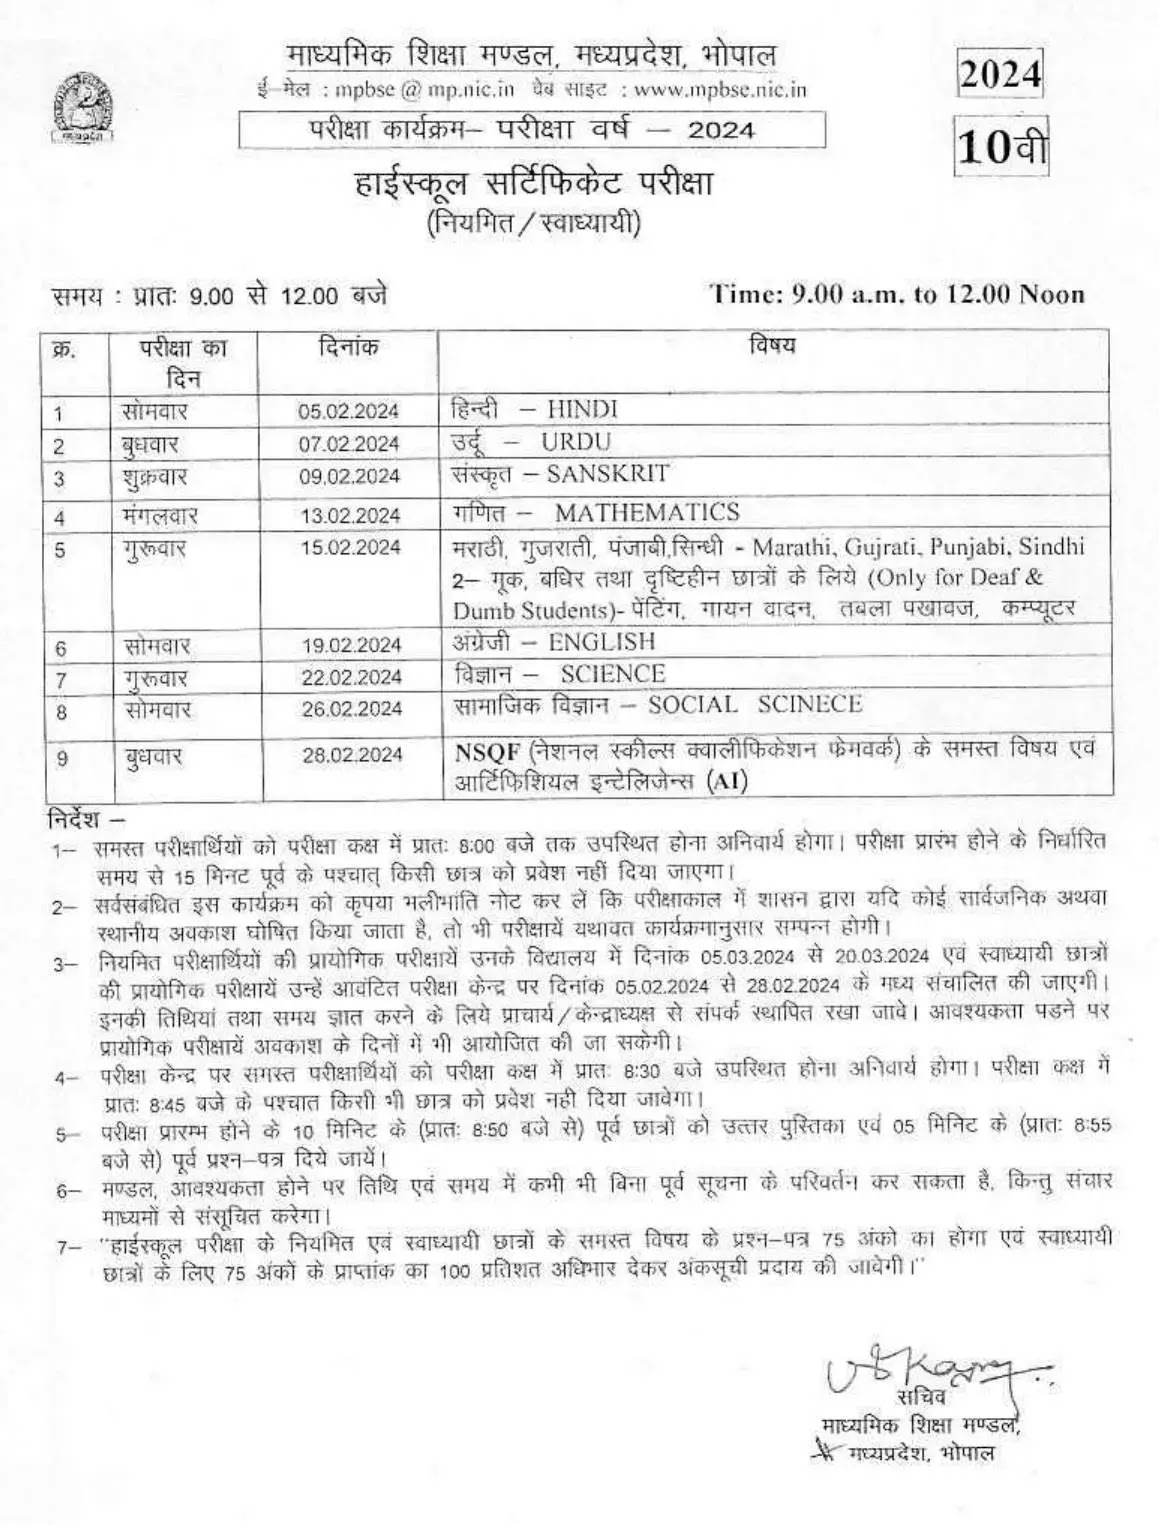 mp board 10th class time table 2024